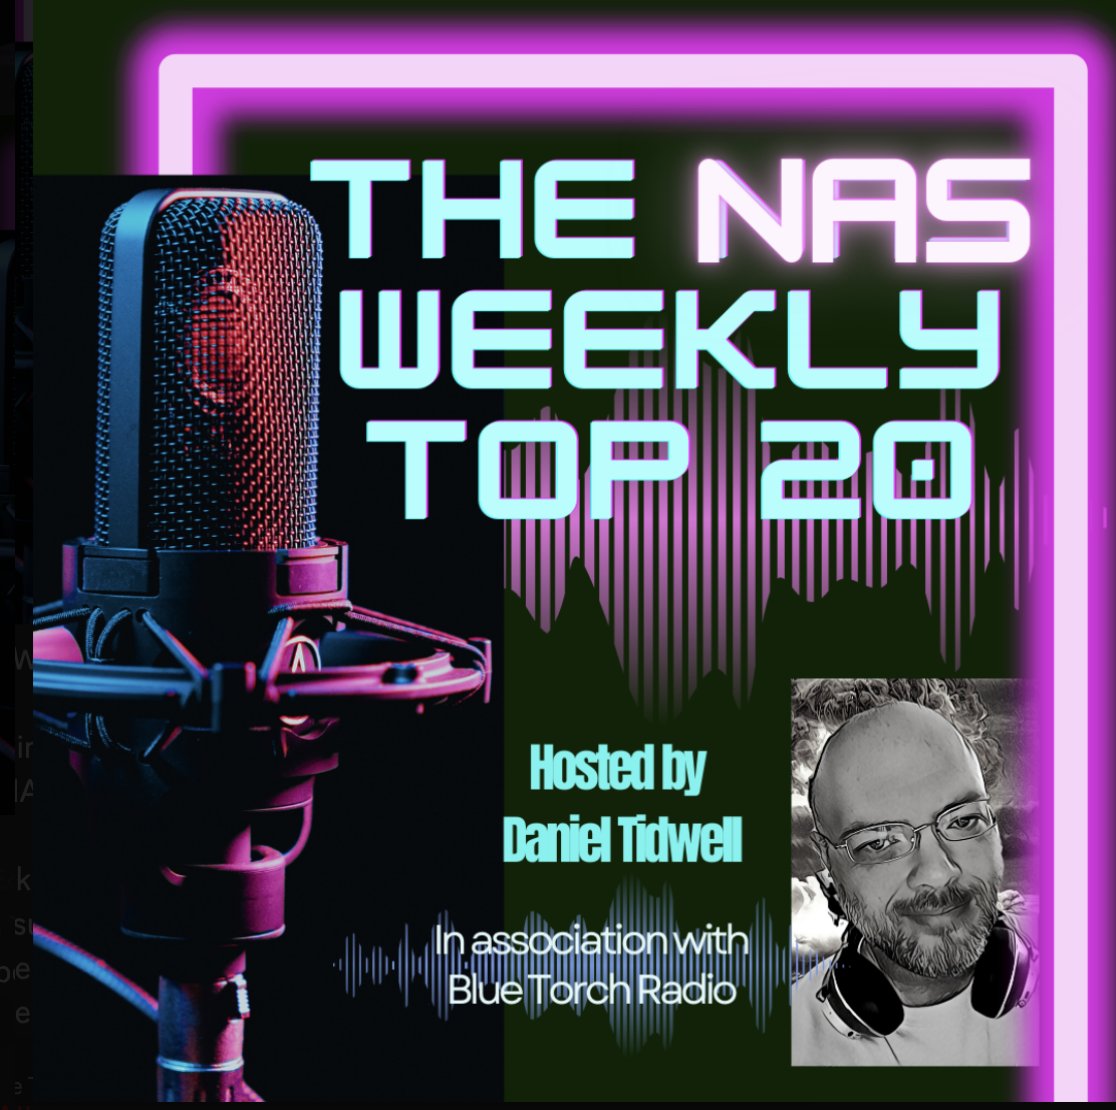 NAS Top 20 Hosted by @DanielTidwell14 in association with Blue Torch Radio Pick Their Skullz' @LizJamesMusic with @AlessiaRaisi Check it out 5 PM UK / Noon ET / 9 AM PT bluetorchradio.com #indiemusic #iwantmynas #radio #StopPayola #newartist #radioshow